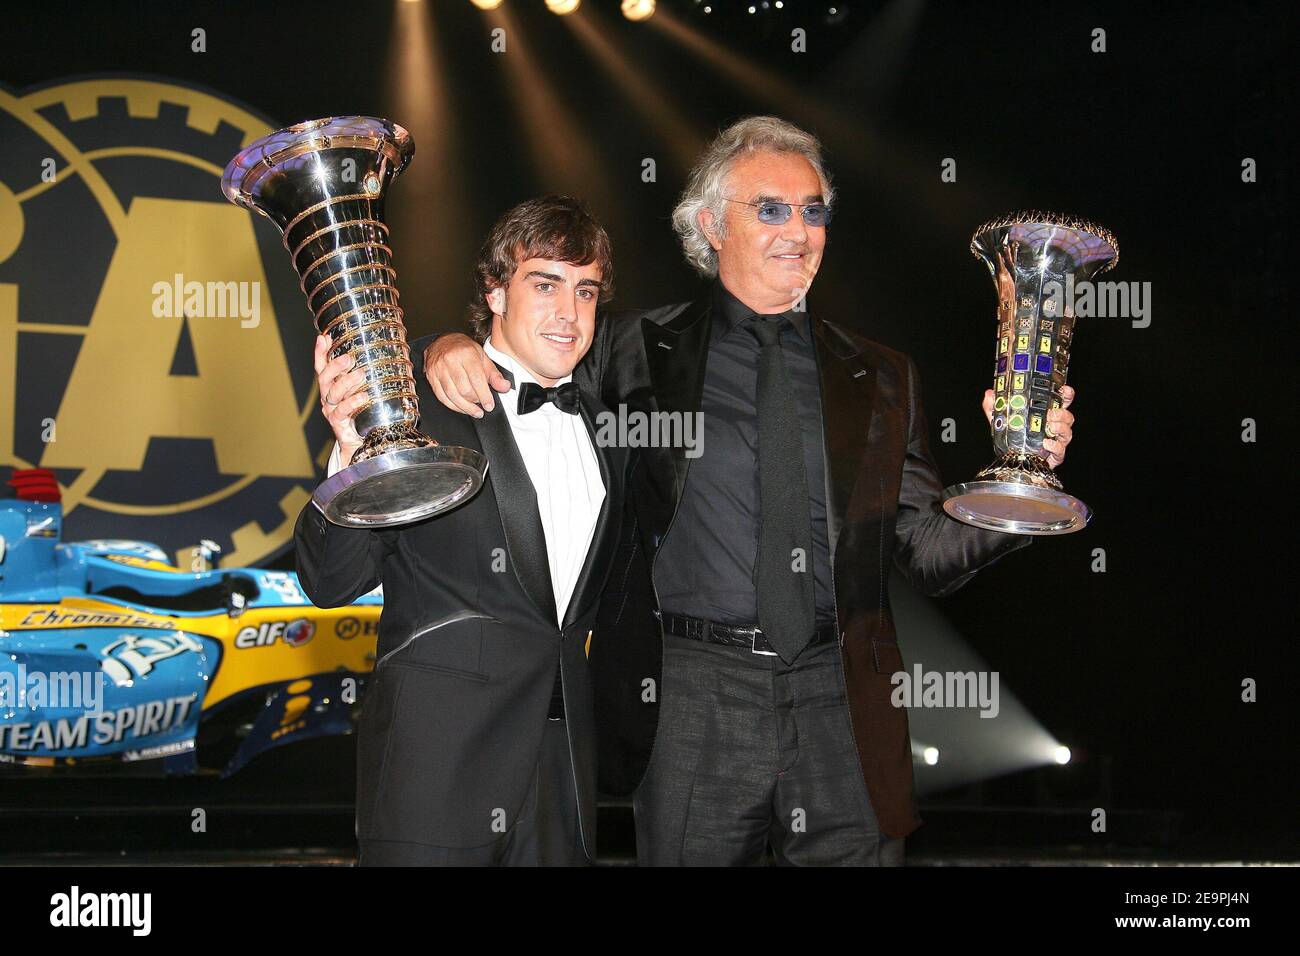 Formula one champion Fernando Alonso of Spain and Renault team manager  Flavio Briatore of Italy pose with their trophies at the 2006 FIA Gala held  in Monaco on December 8, 2006. Photo